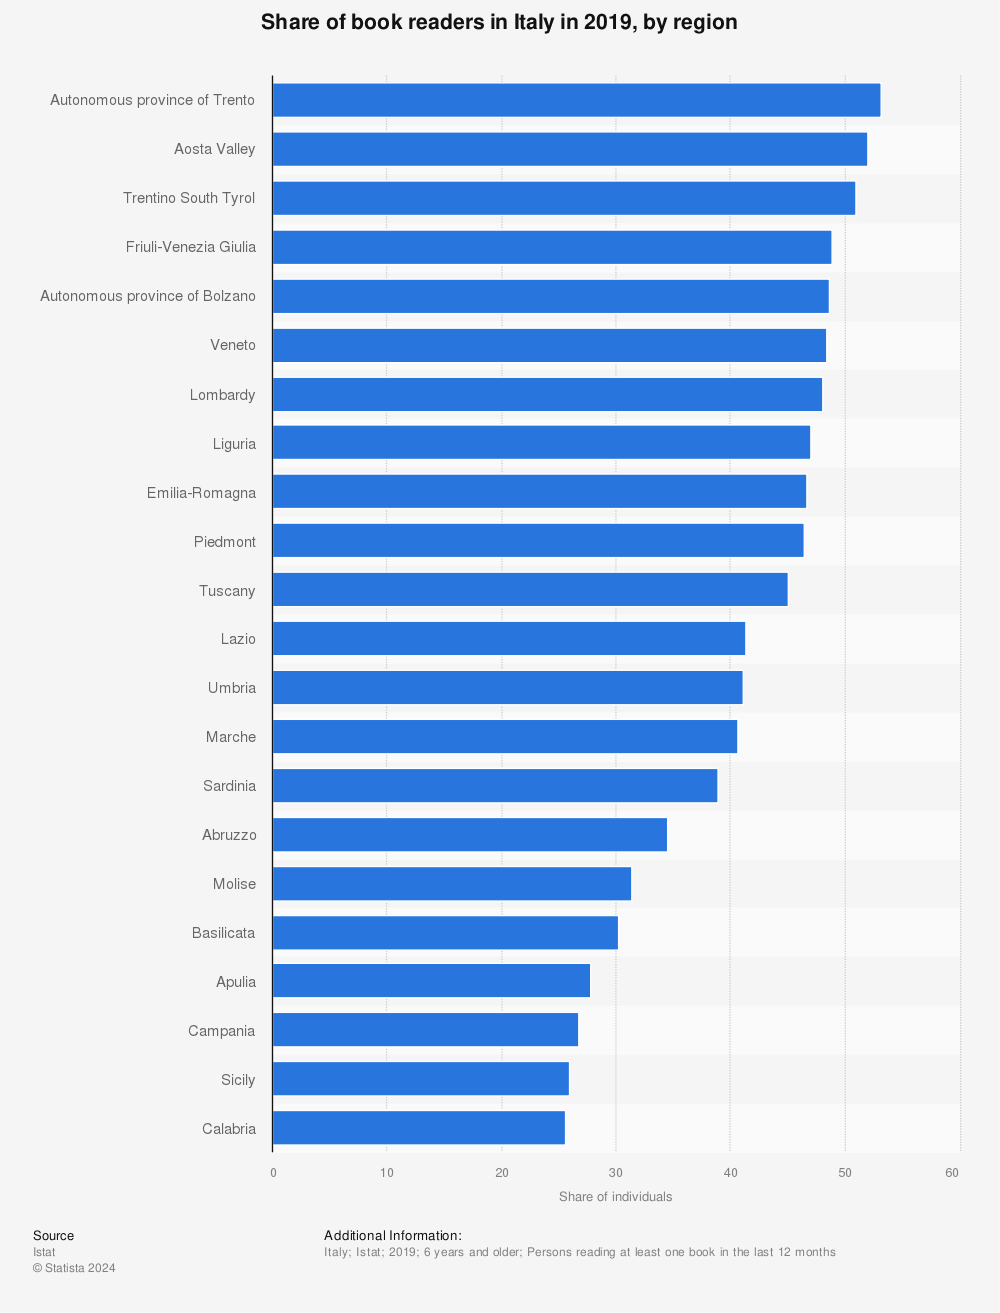 Statistic: Share of book readers in Italy in 2019, by region  | Statista